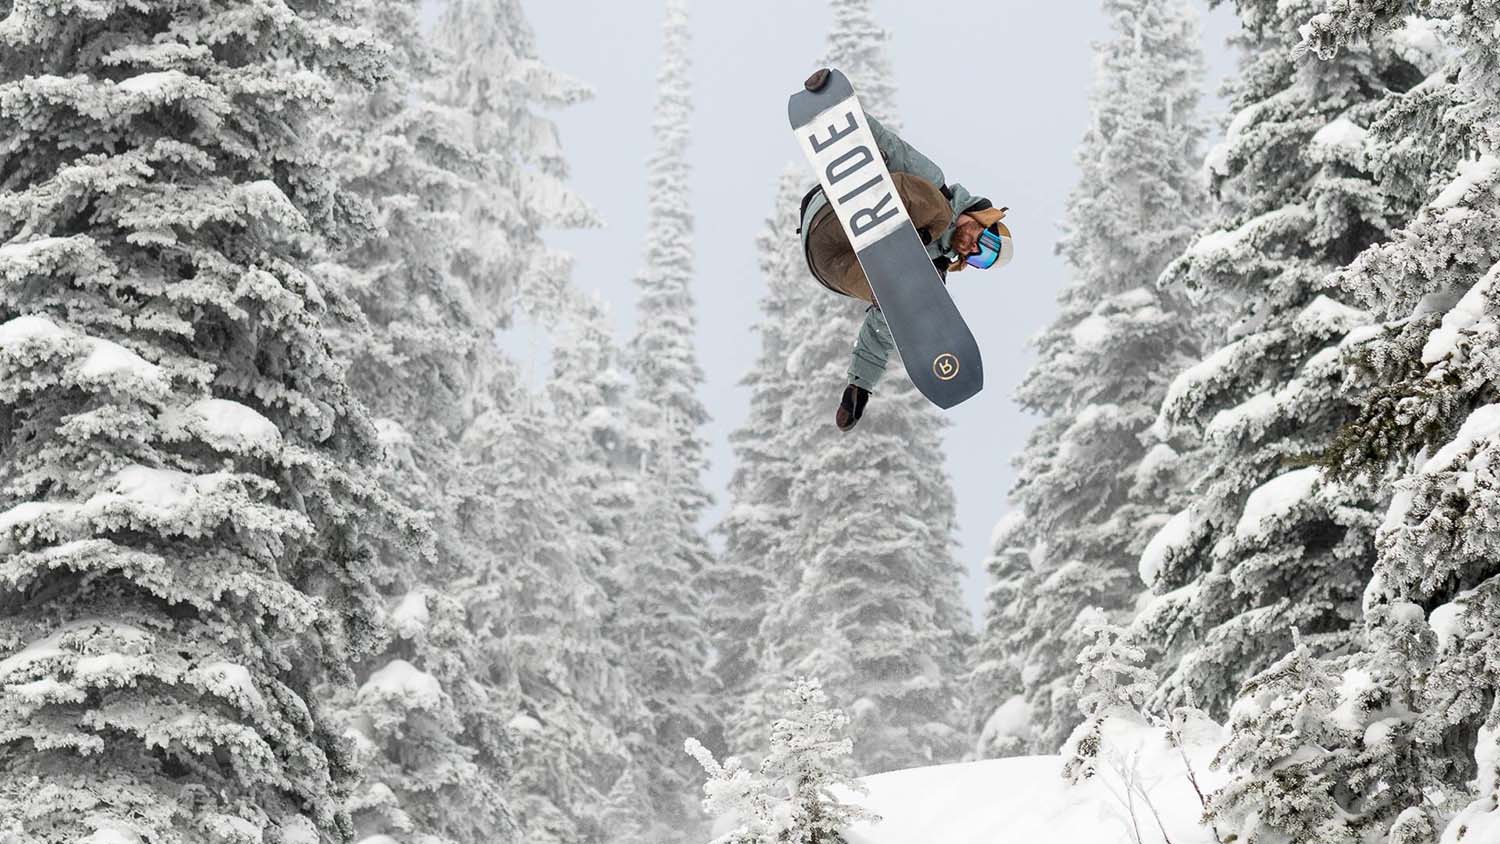 Upgrade your winter gear closet with the worlds best snowboarding brands